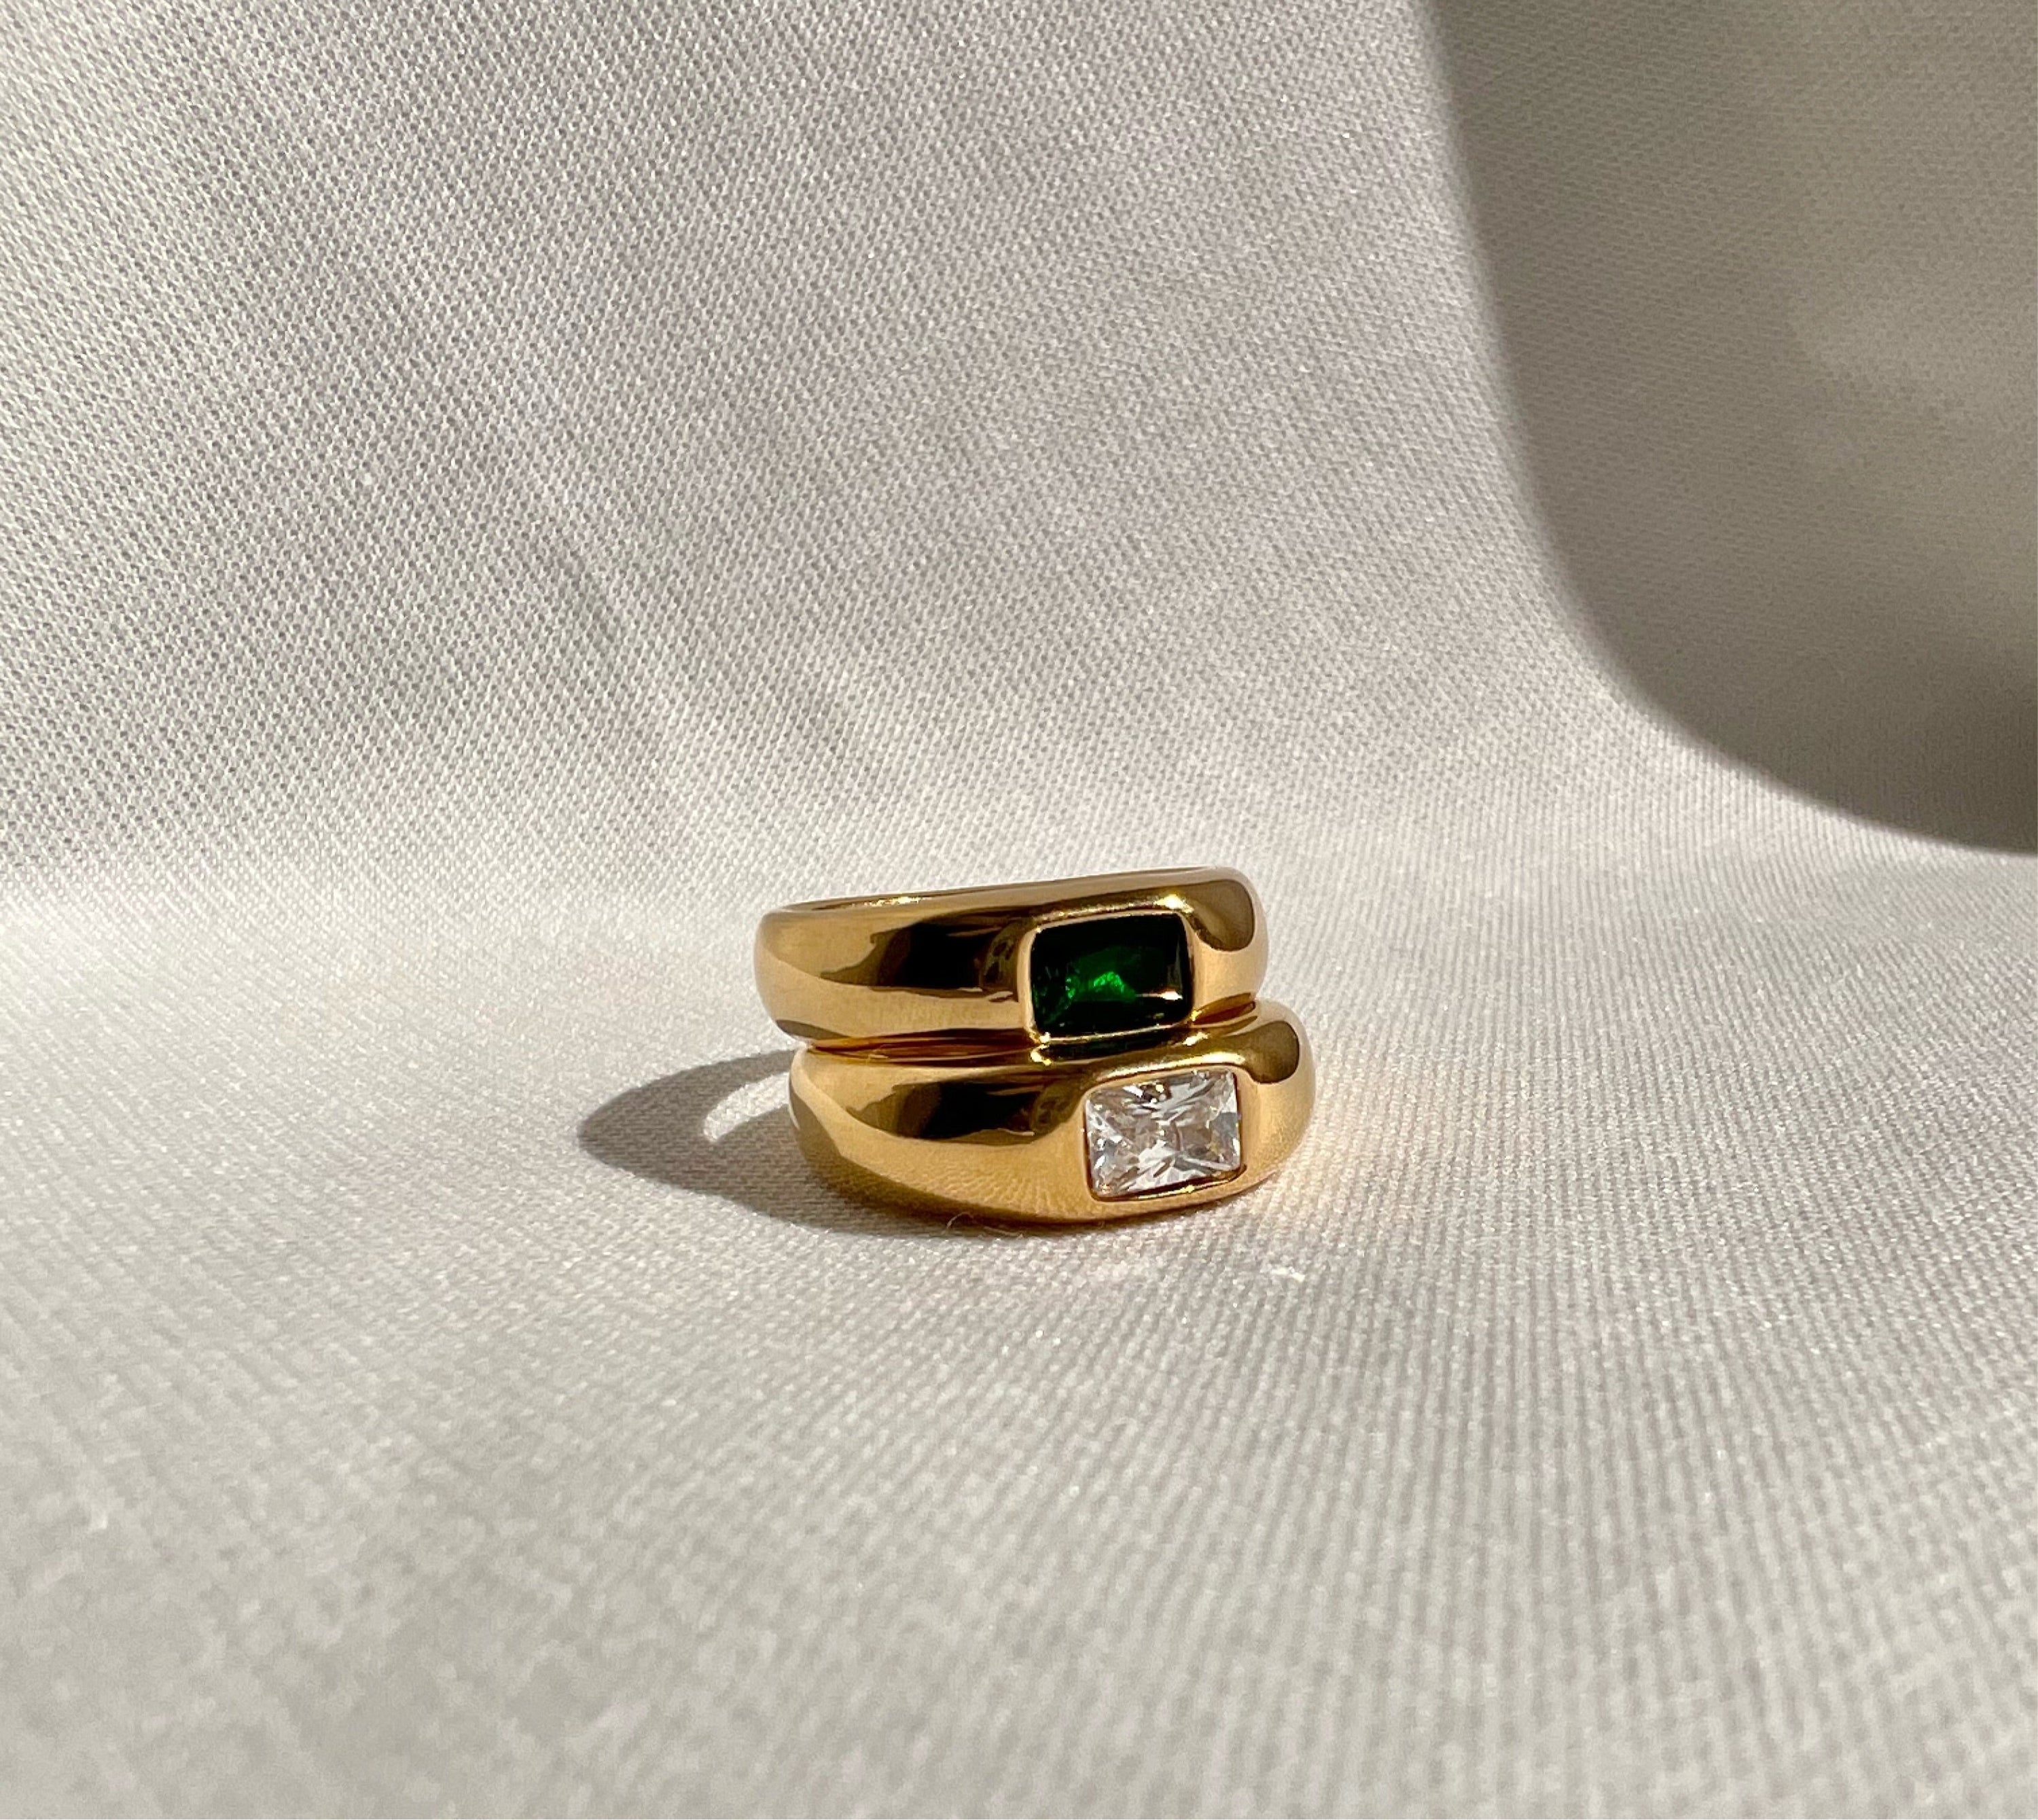 Green Cubic Zirconia Emerald Statement Ring - Hypoallergenic & Tarnish Resistant in 18k Gold Plated Stainless Steel - Jewelry & Watches - Bijou Her -  -  - 